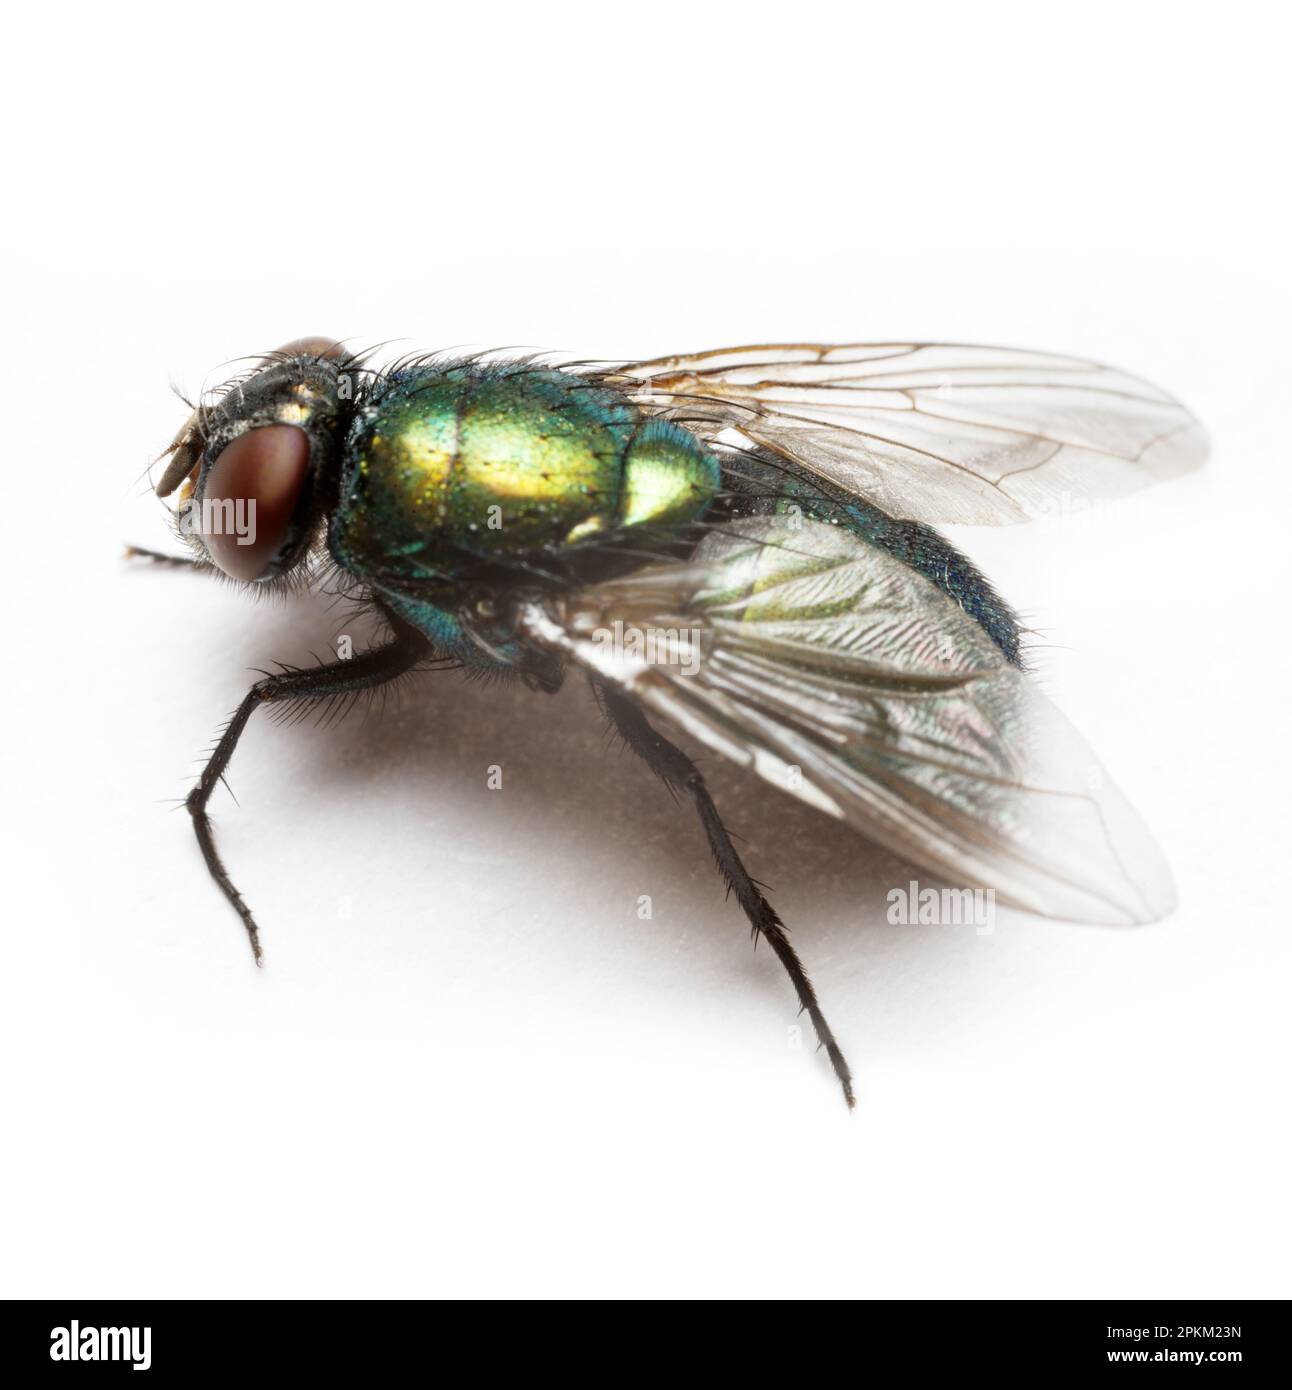 Latin name is Lucilia caesar - The ferocious and greedy fly that Homer wrote about in the Iliad. Extreme close up fly Stock Photo